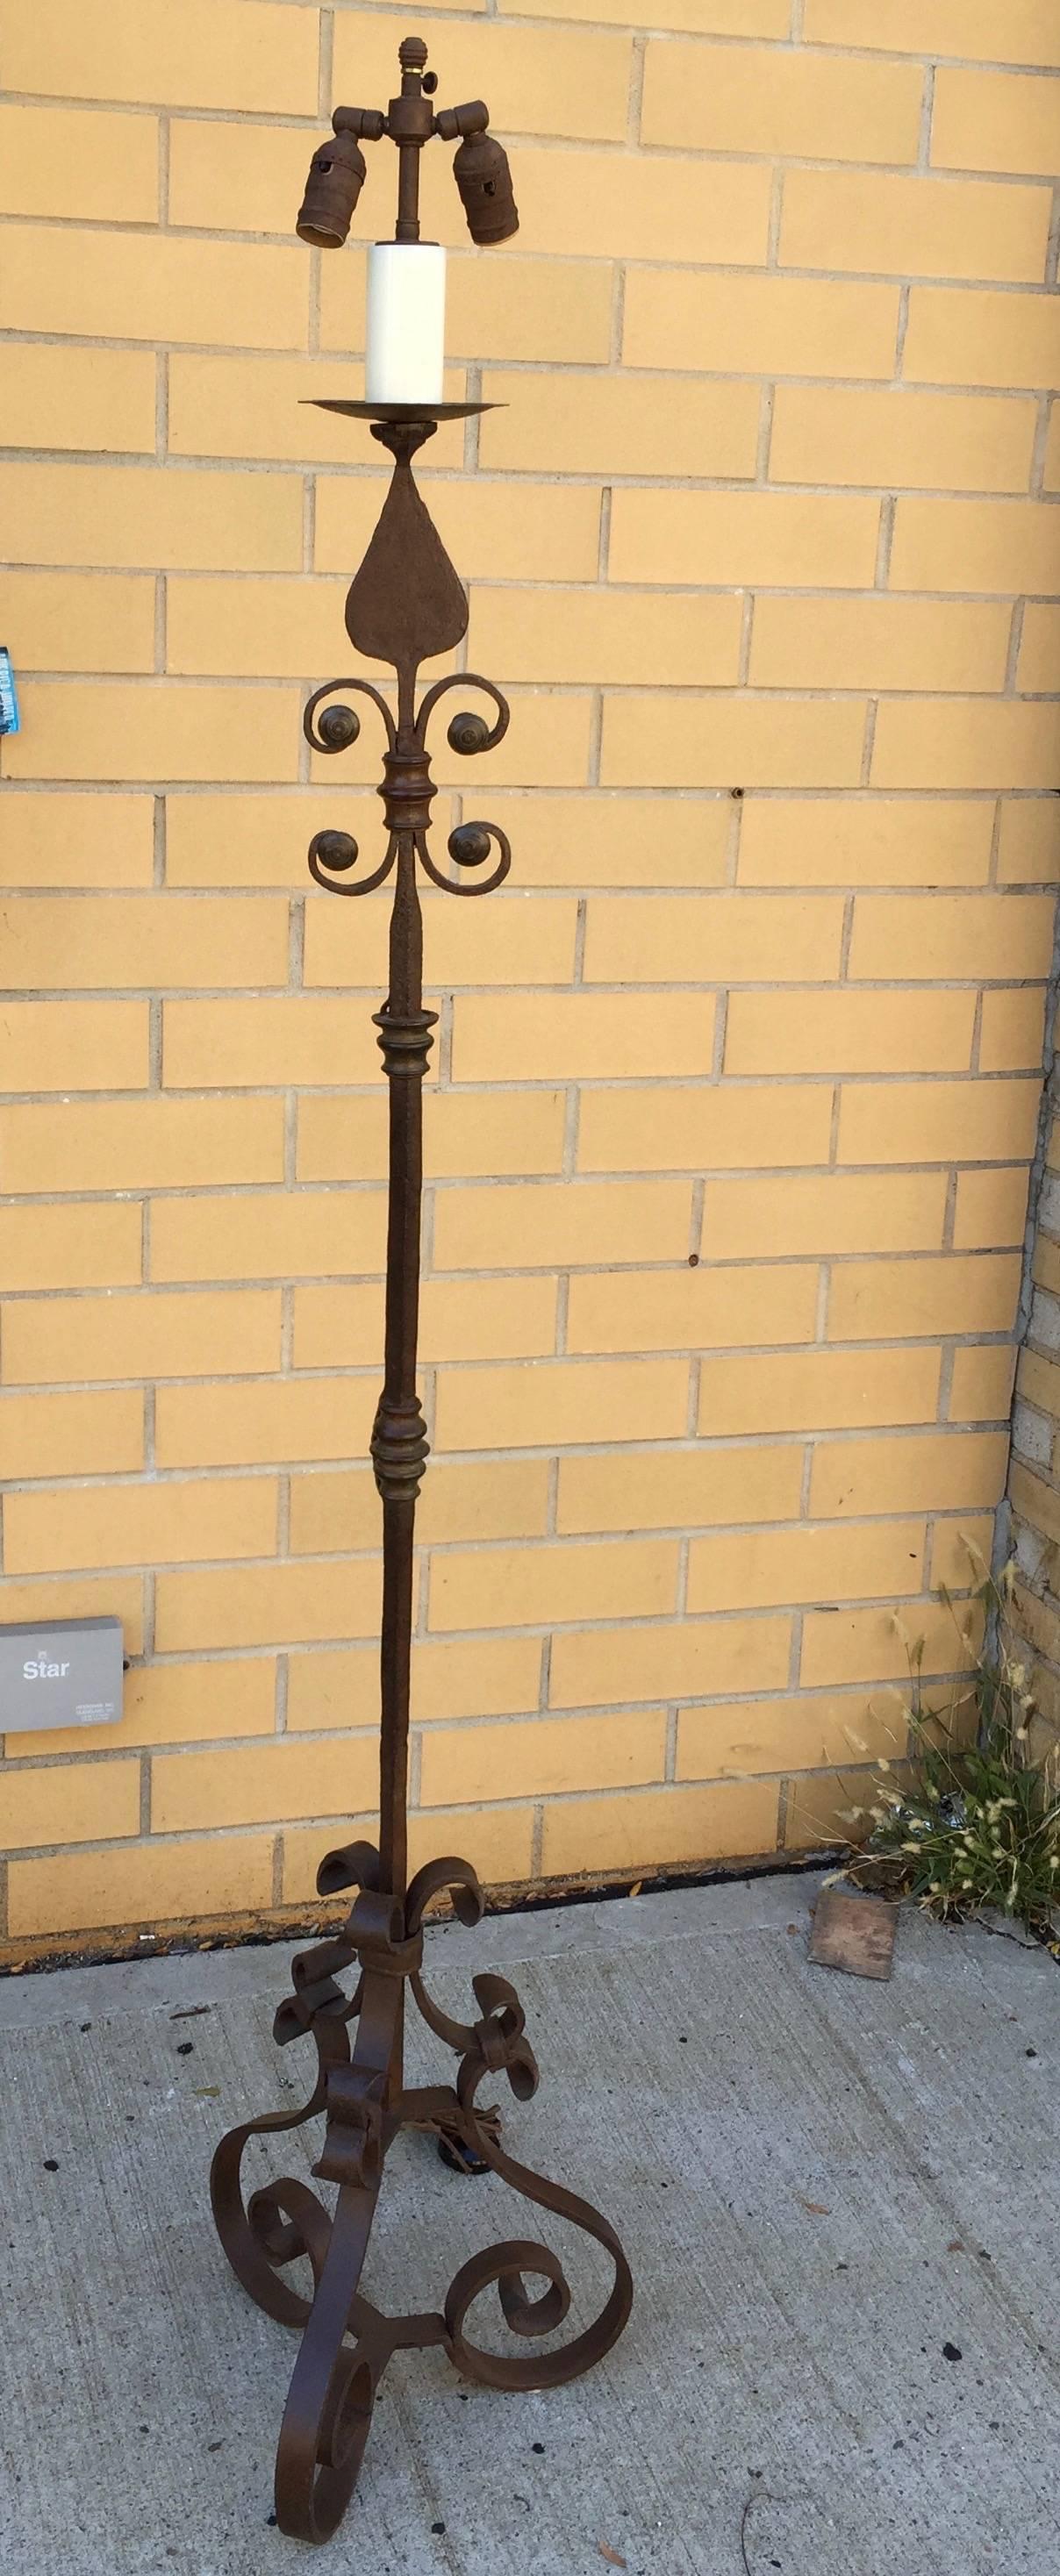 Wonderful hand-wrought iron lamps with controlled rust patina surface and bronze elements.